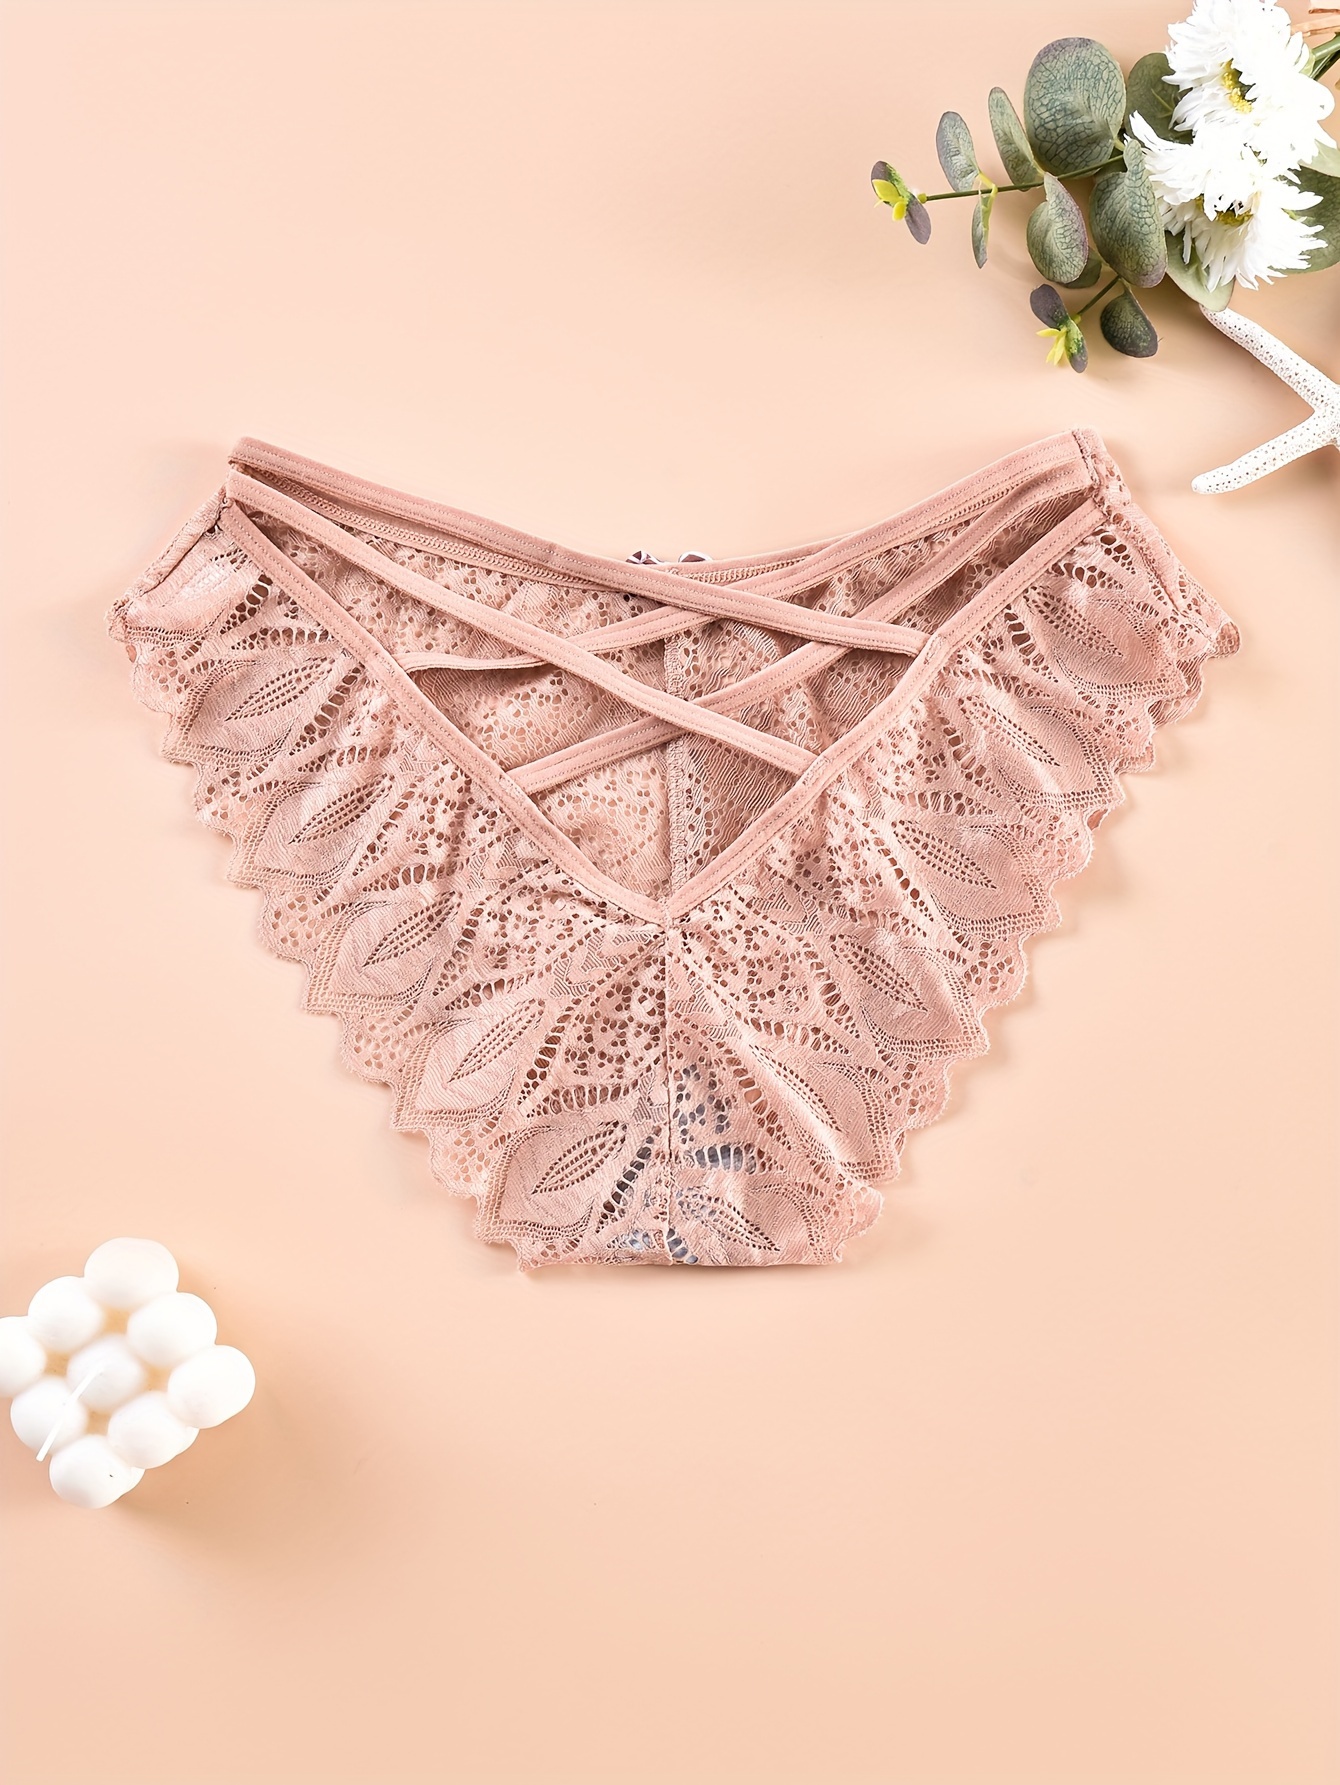 Strappy Lace Cheeky Panty